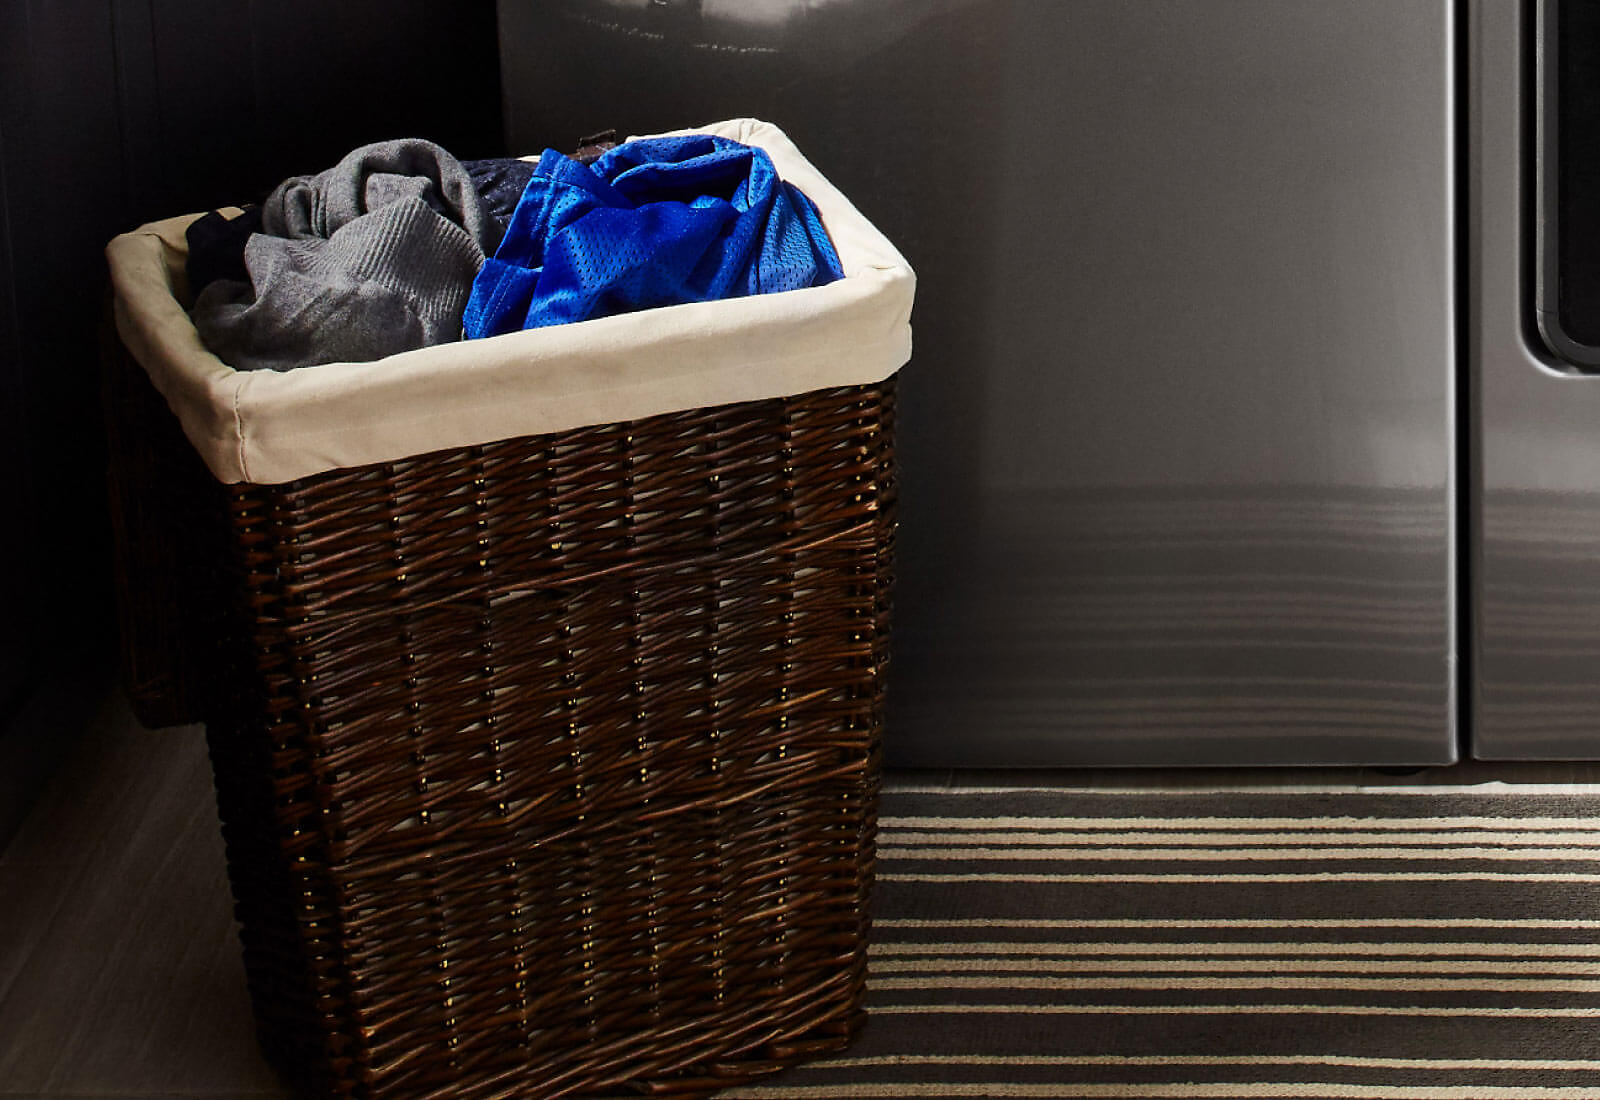 A hamper filled with laundry sorted by color